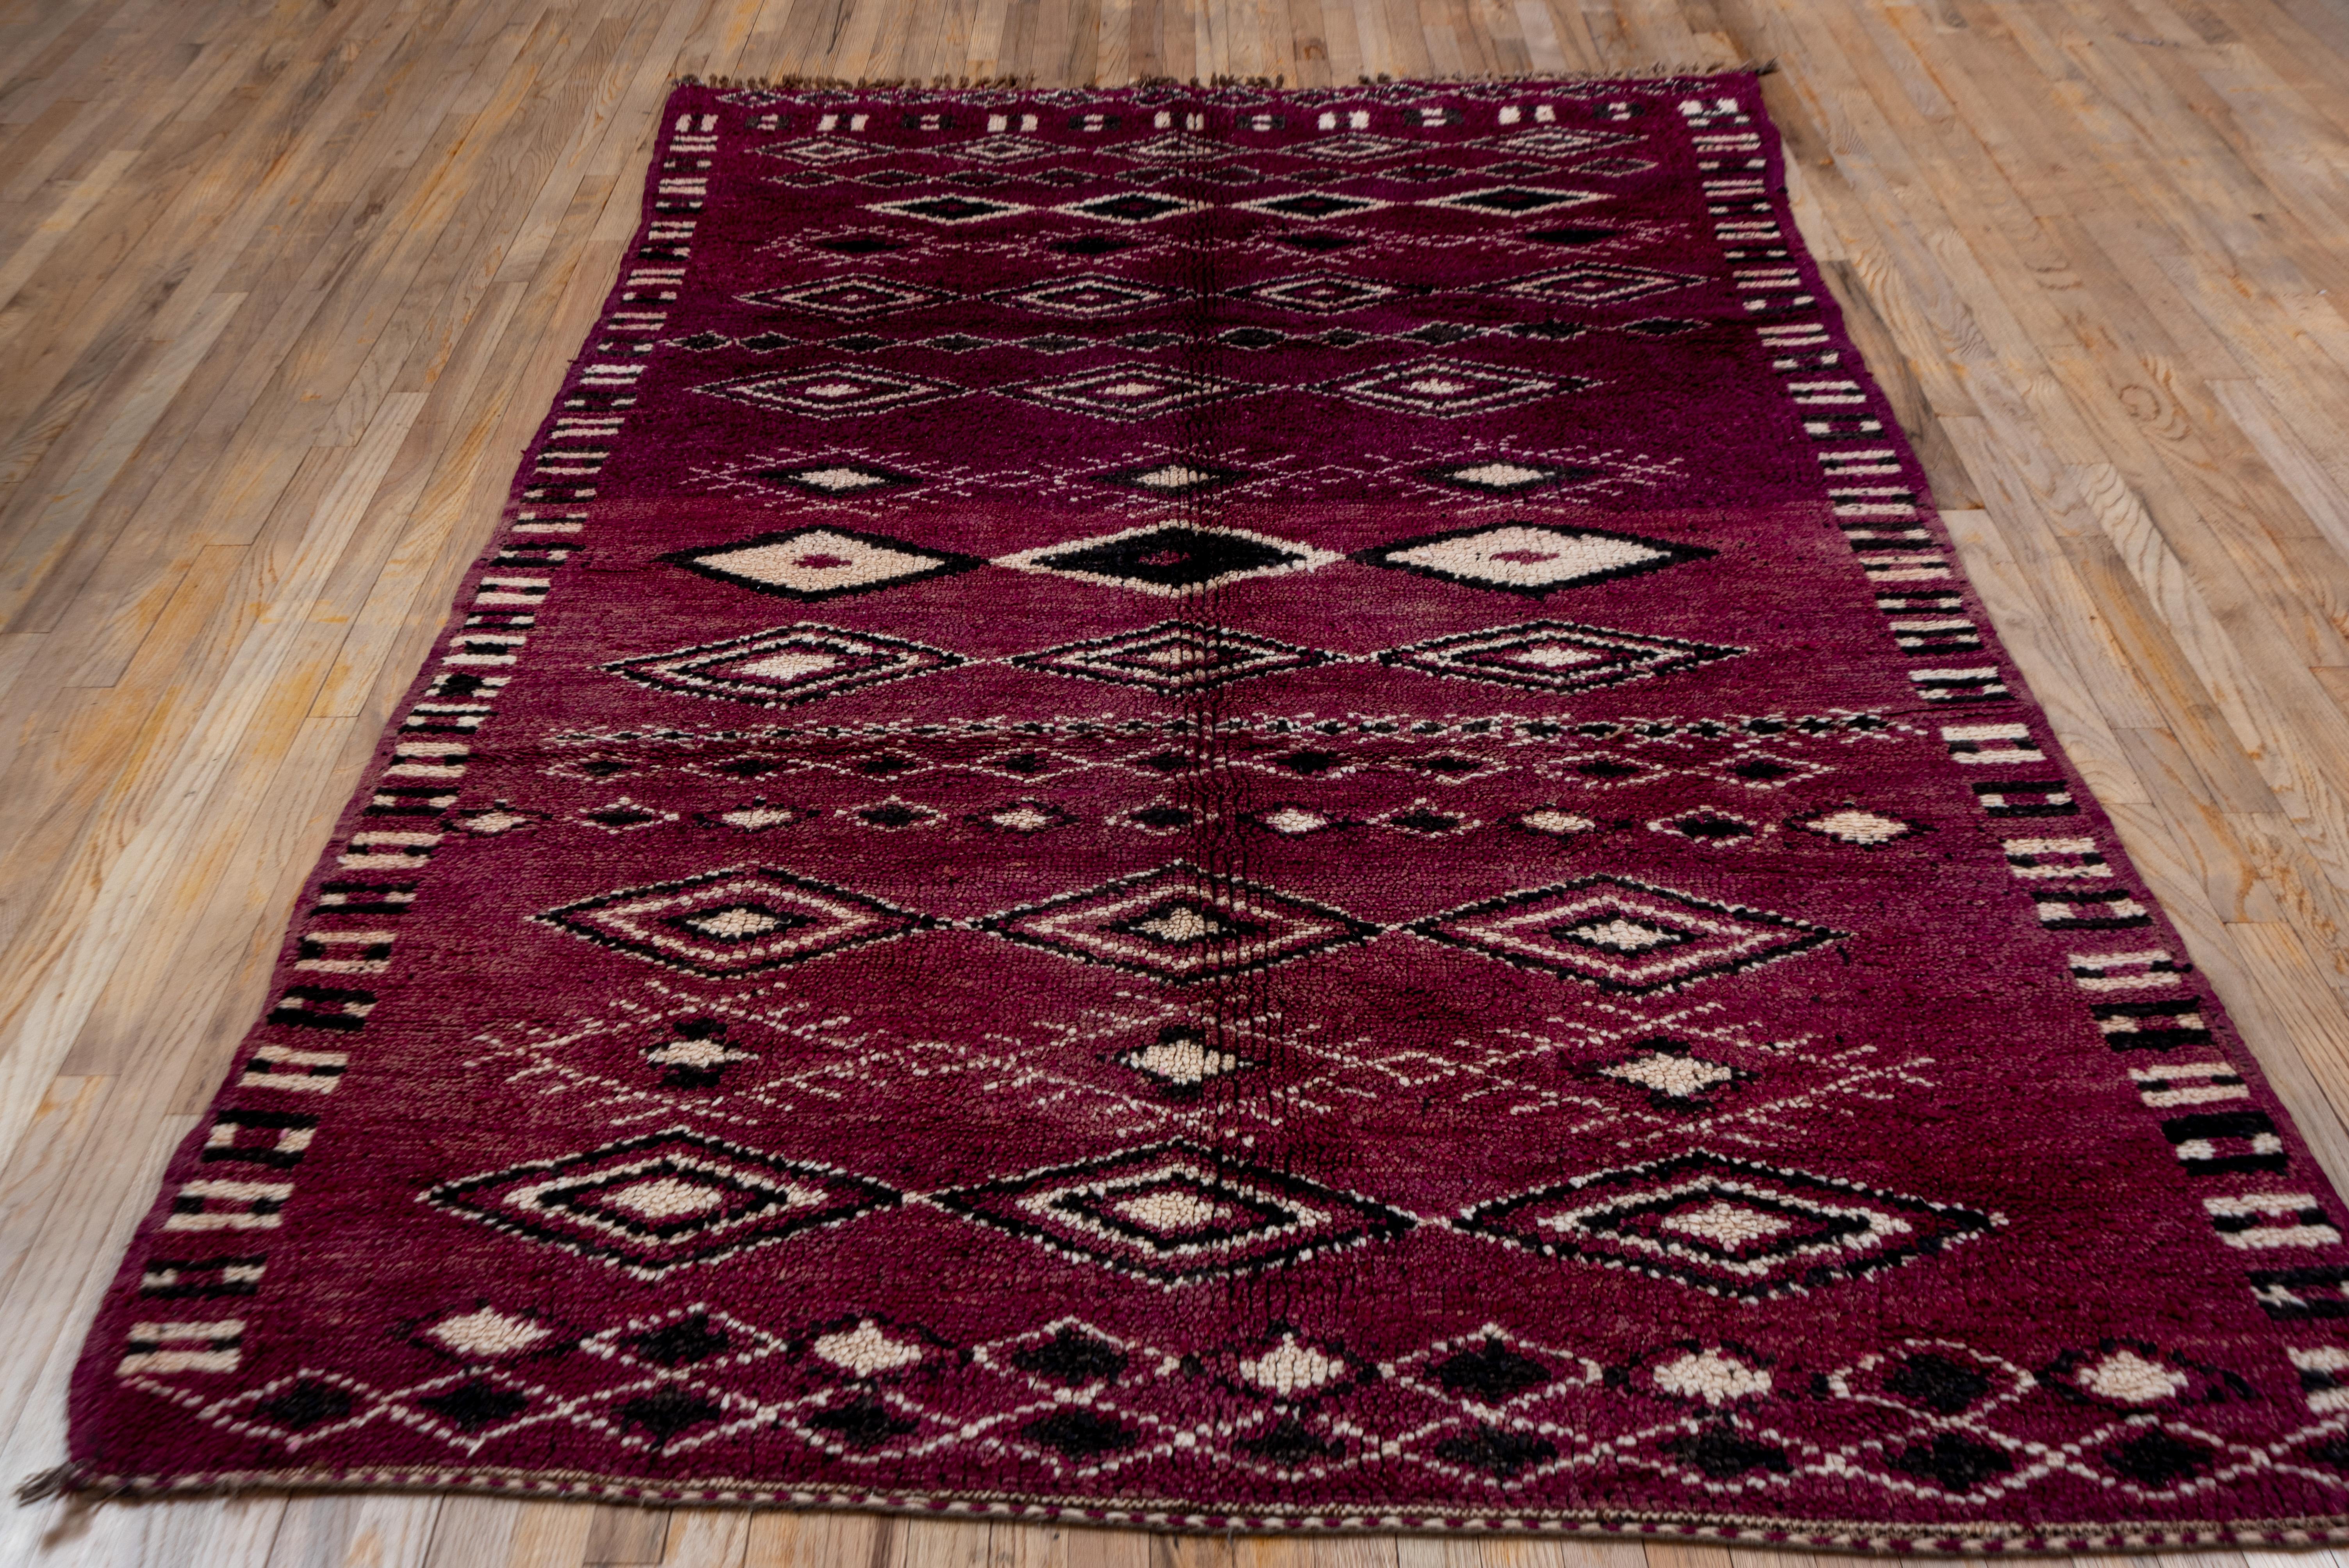 rug with purple accents